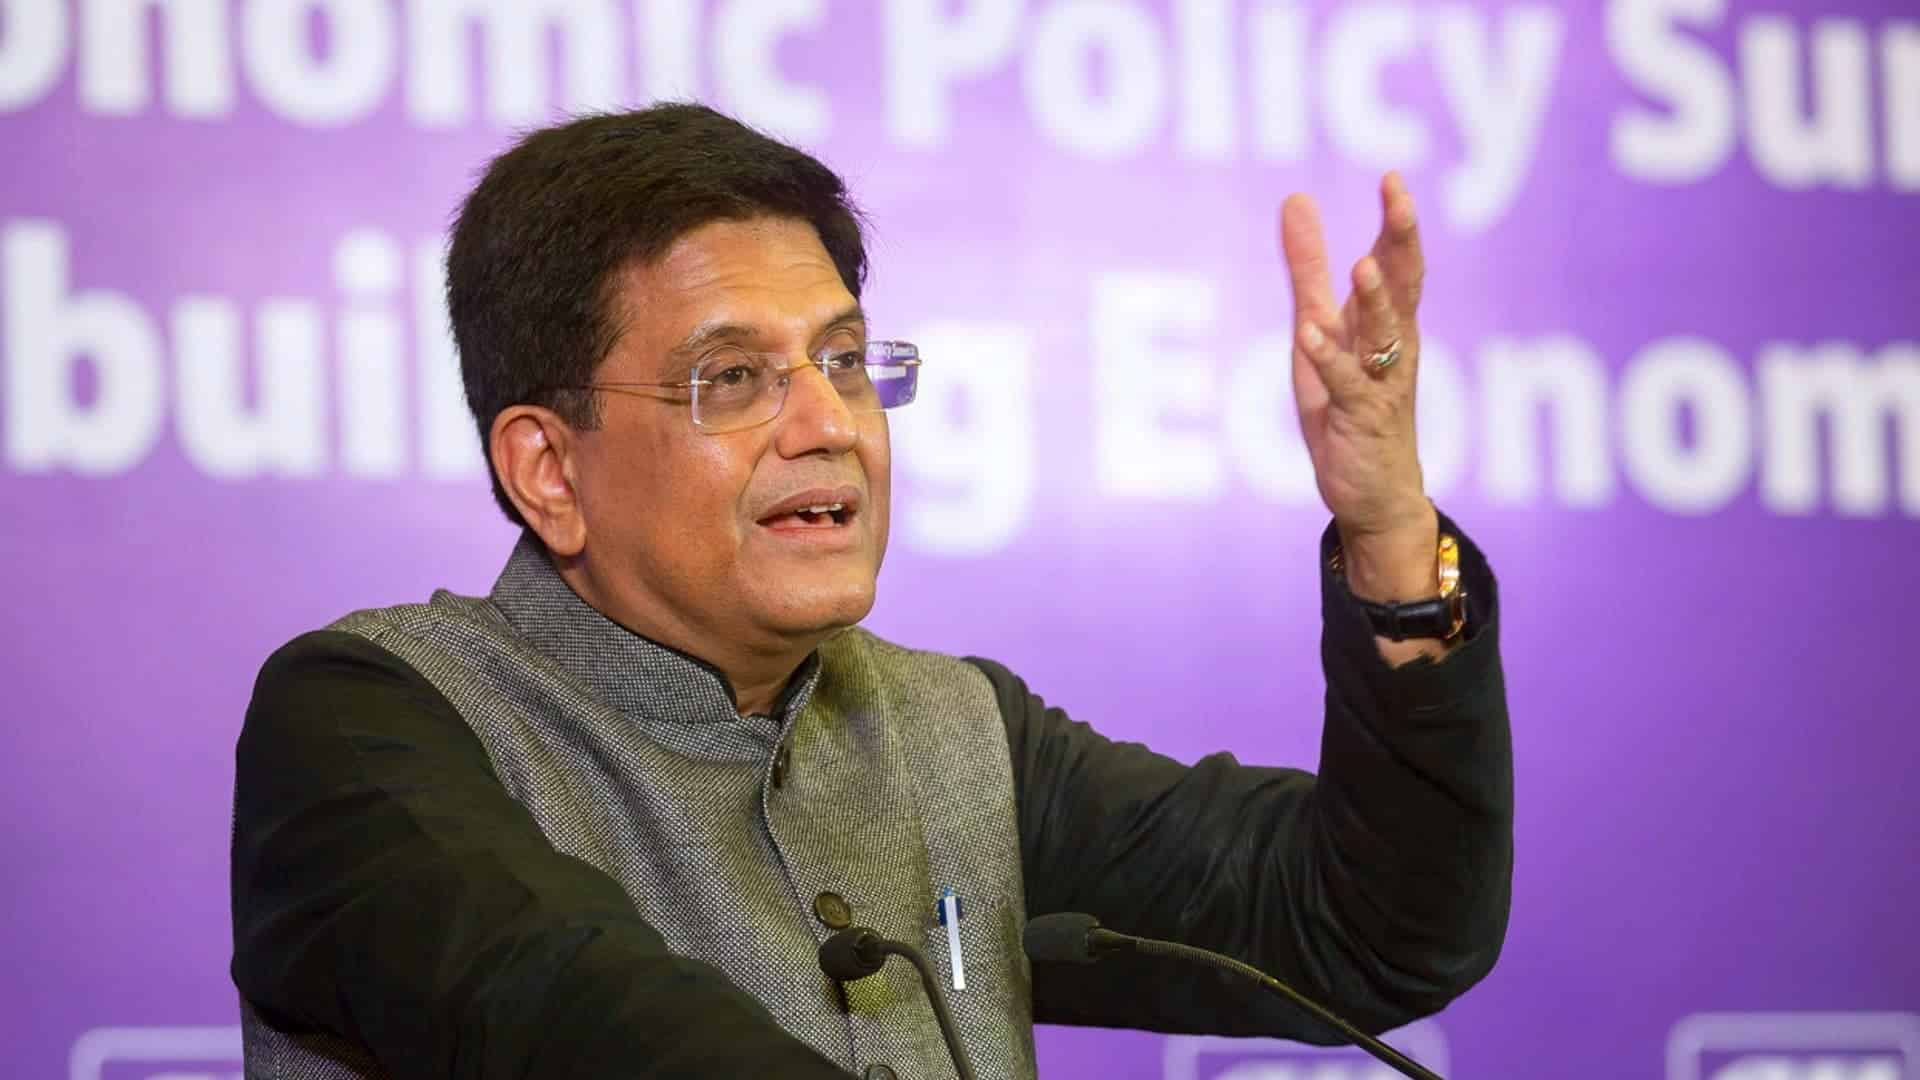 Govt taking significant steps to boost startup ecosystem: Goyal